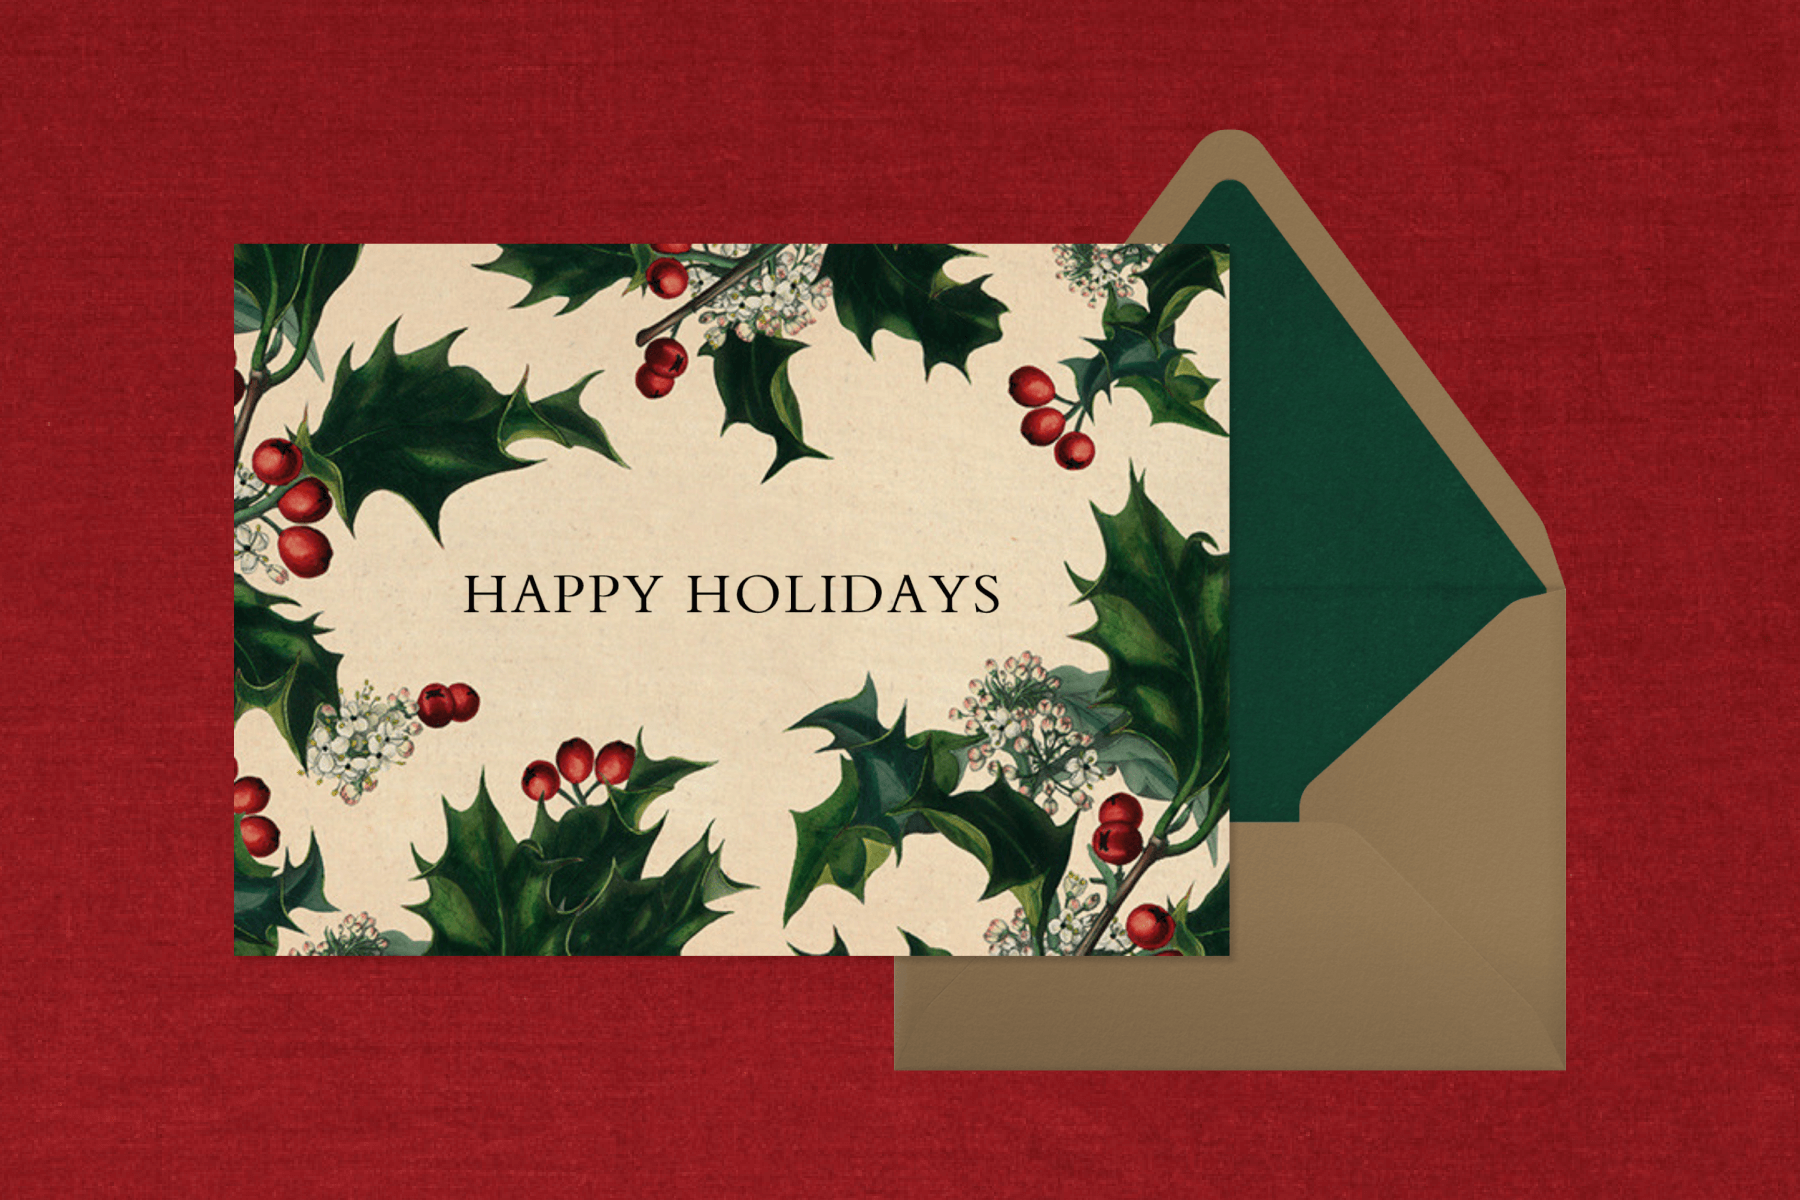 A card says “happy holidays” surrounded by realistic holly leaves and berries on a red backdrop.